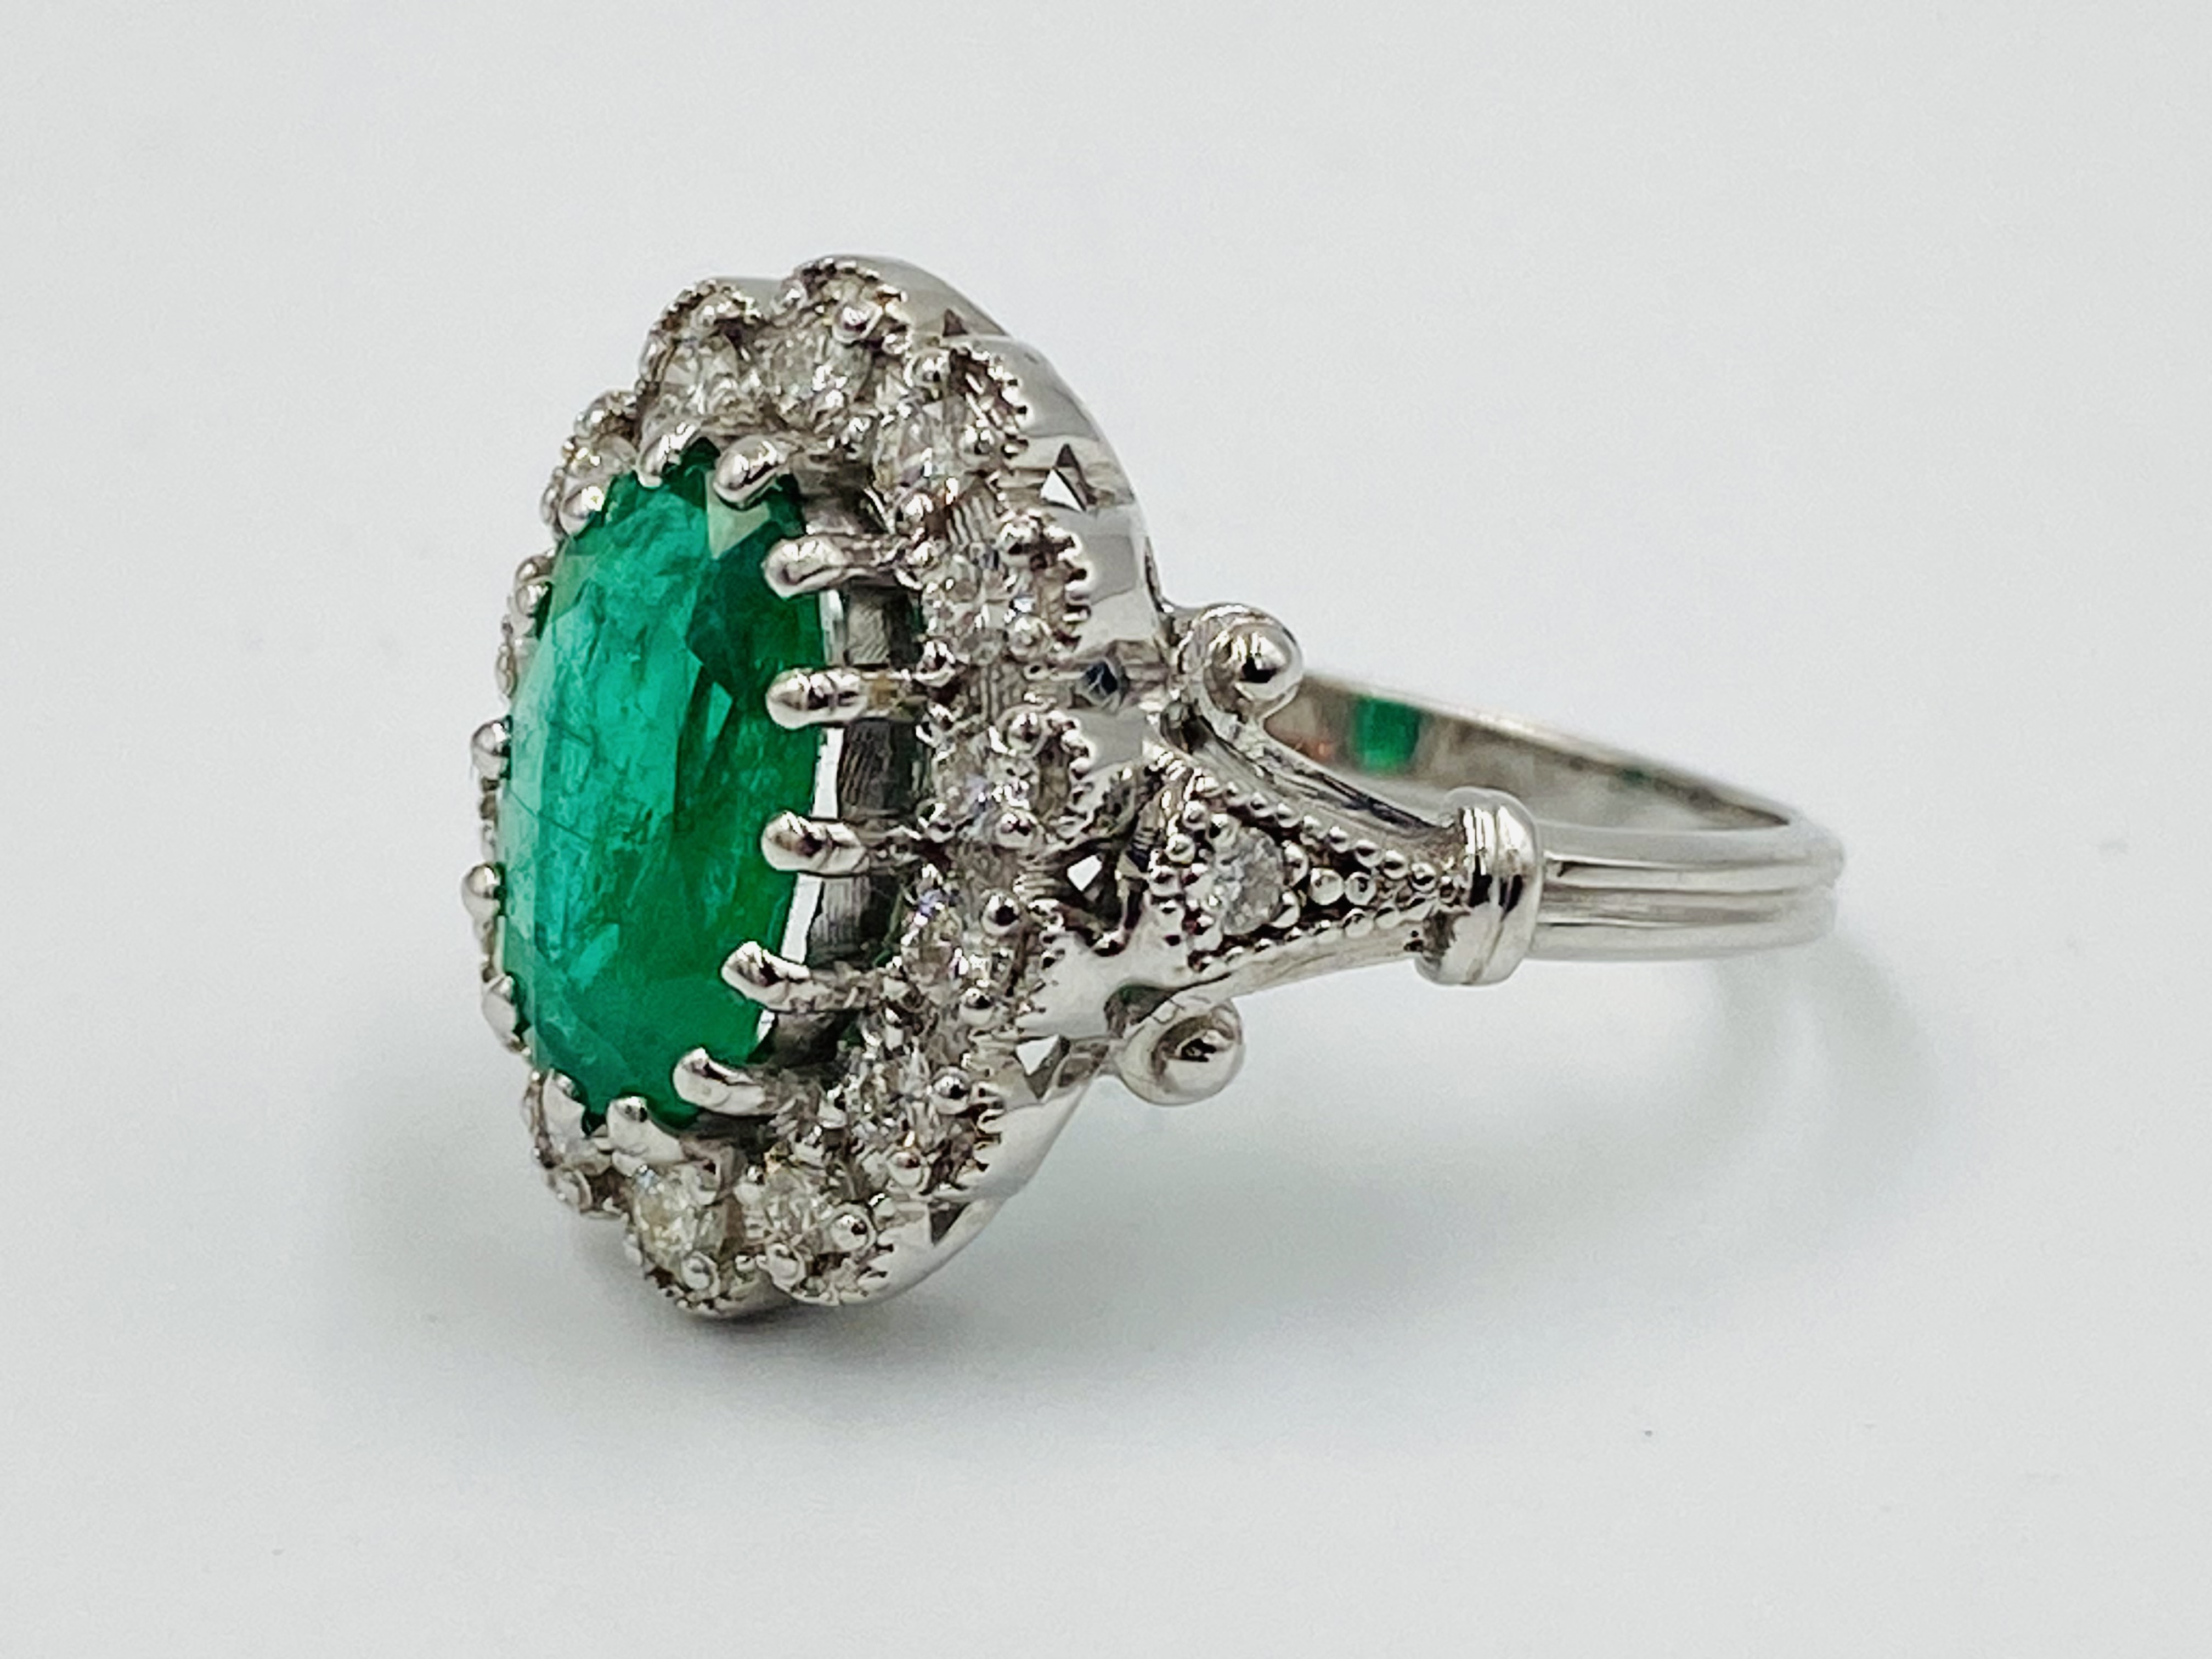 White gold, emerald and diamond ring - Image 2 of 5